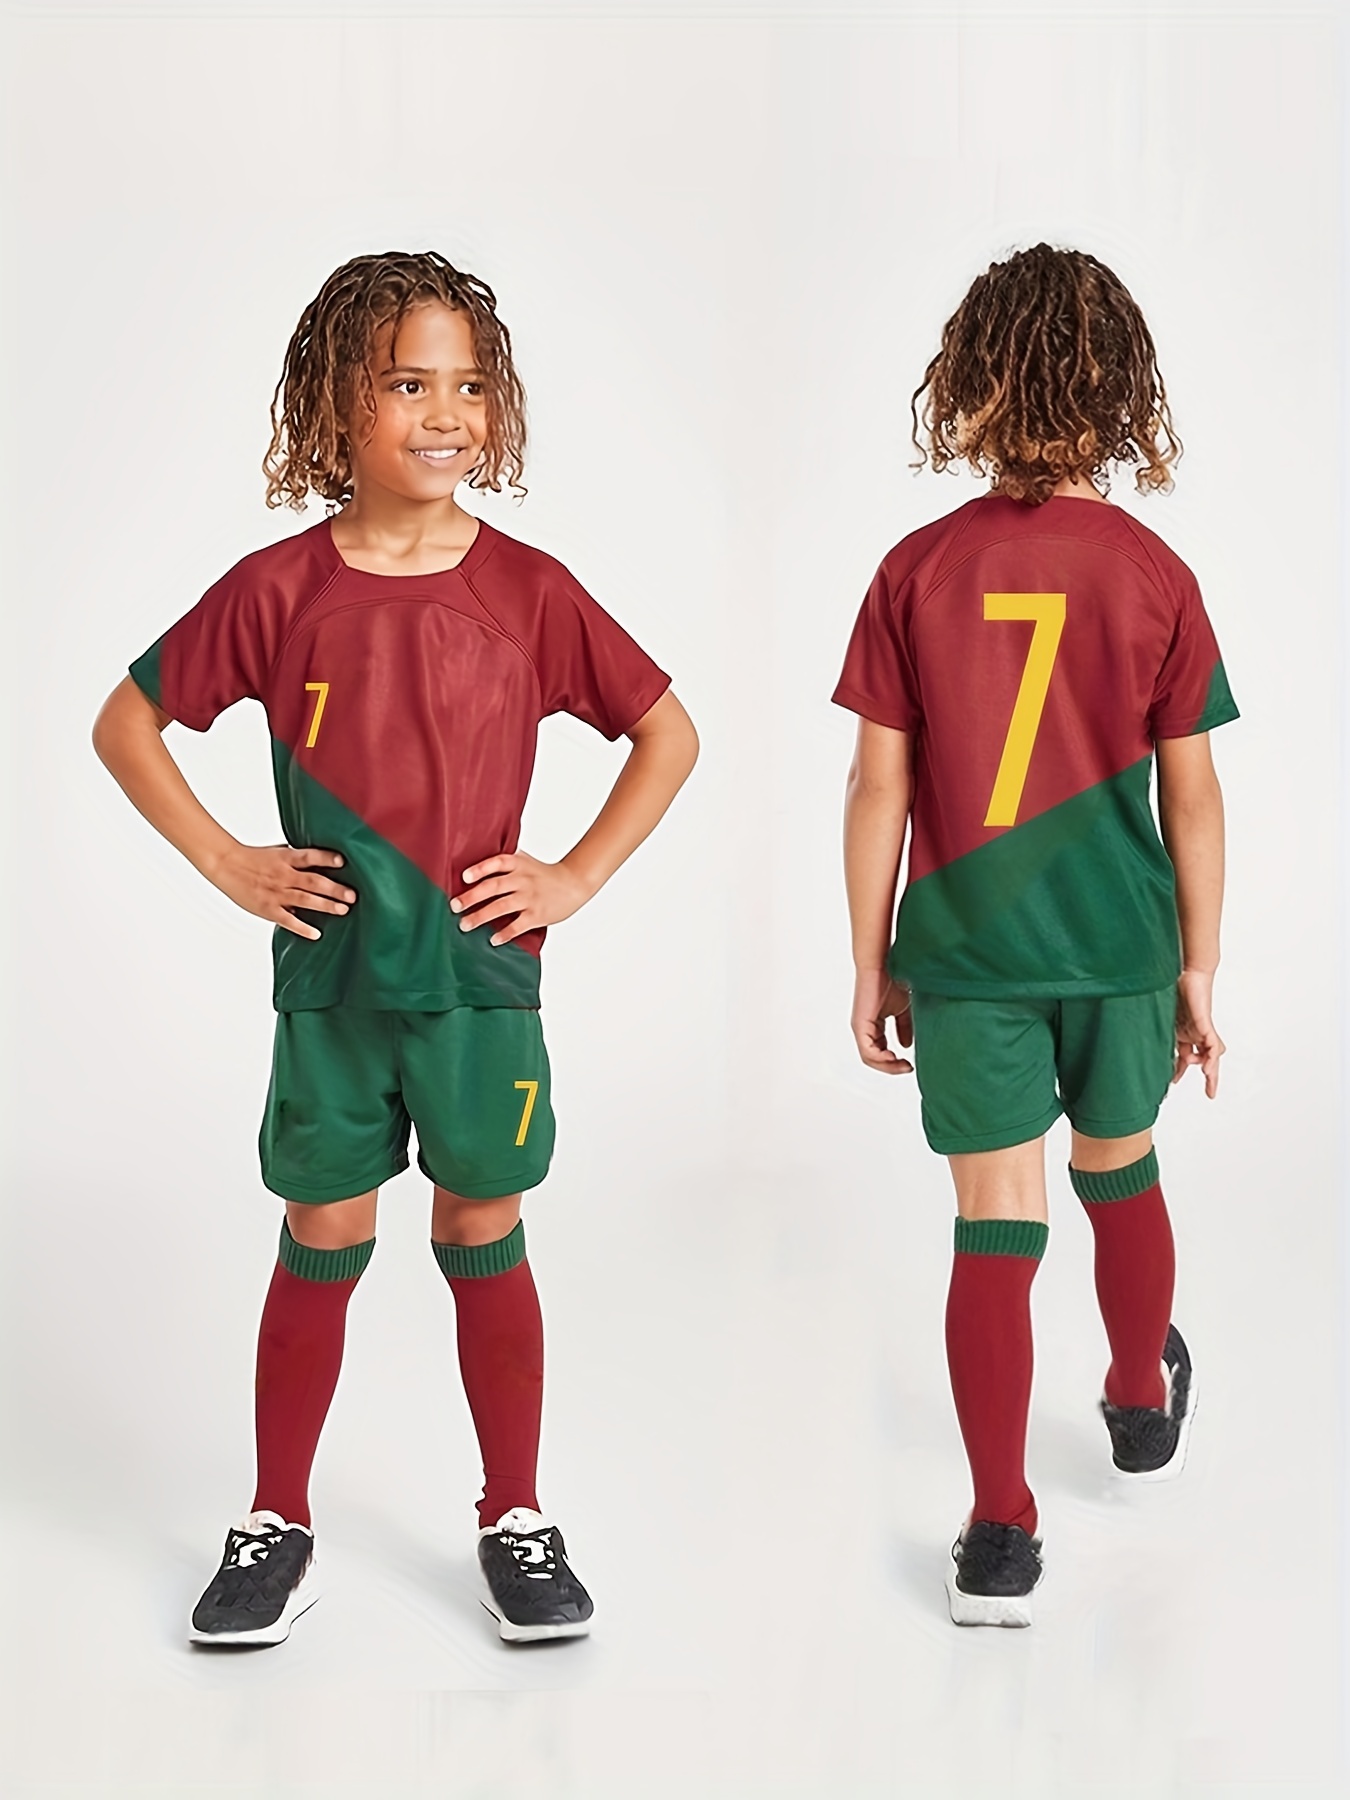 Football Kits and Training Equipment Suppliers - Euro Soccer UK